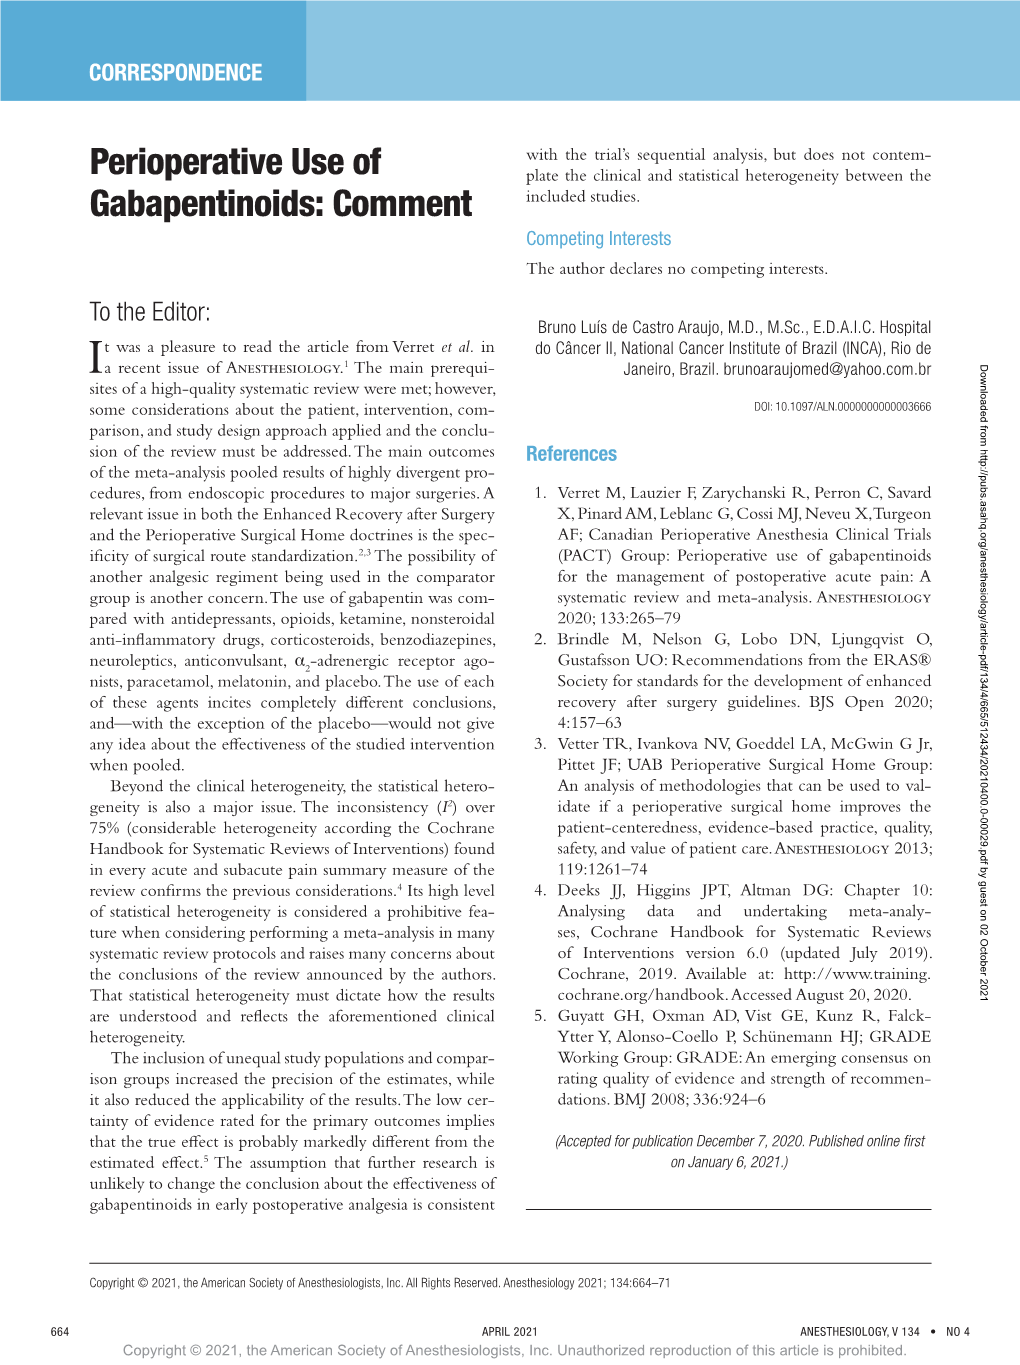 Perioperative Use of Gabapentinoids Another Analgesic Regiment Being Used in the Comparator for the Management of Postoperative Acute Pain: a Group Is Another Concern